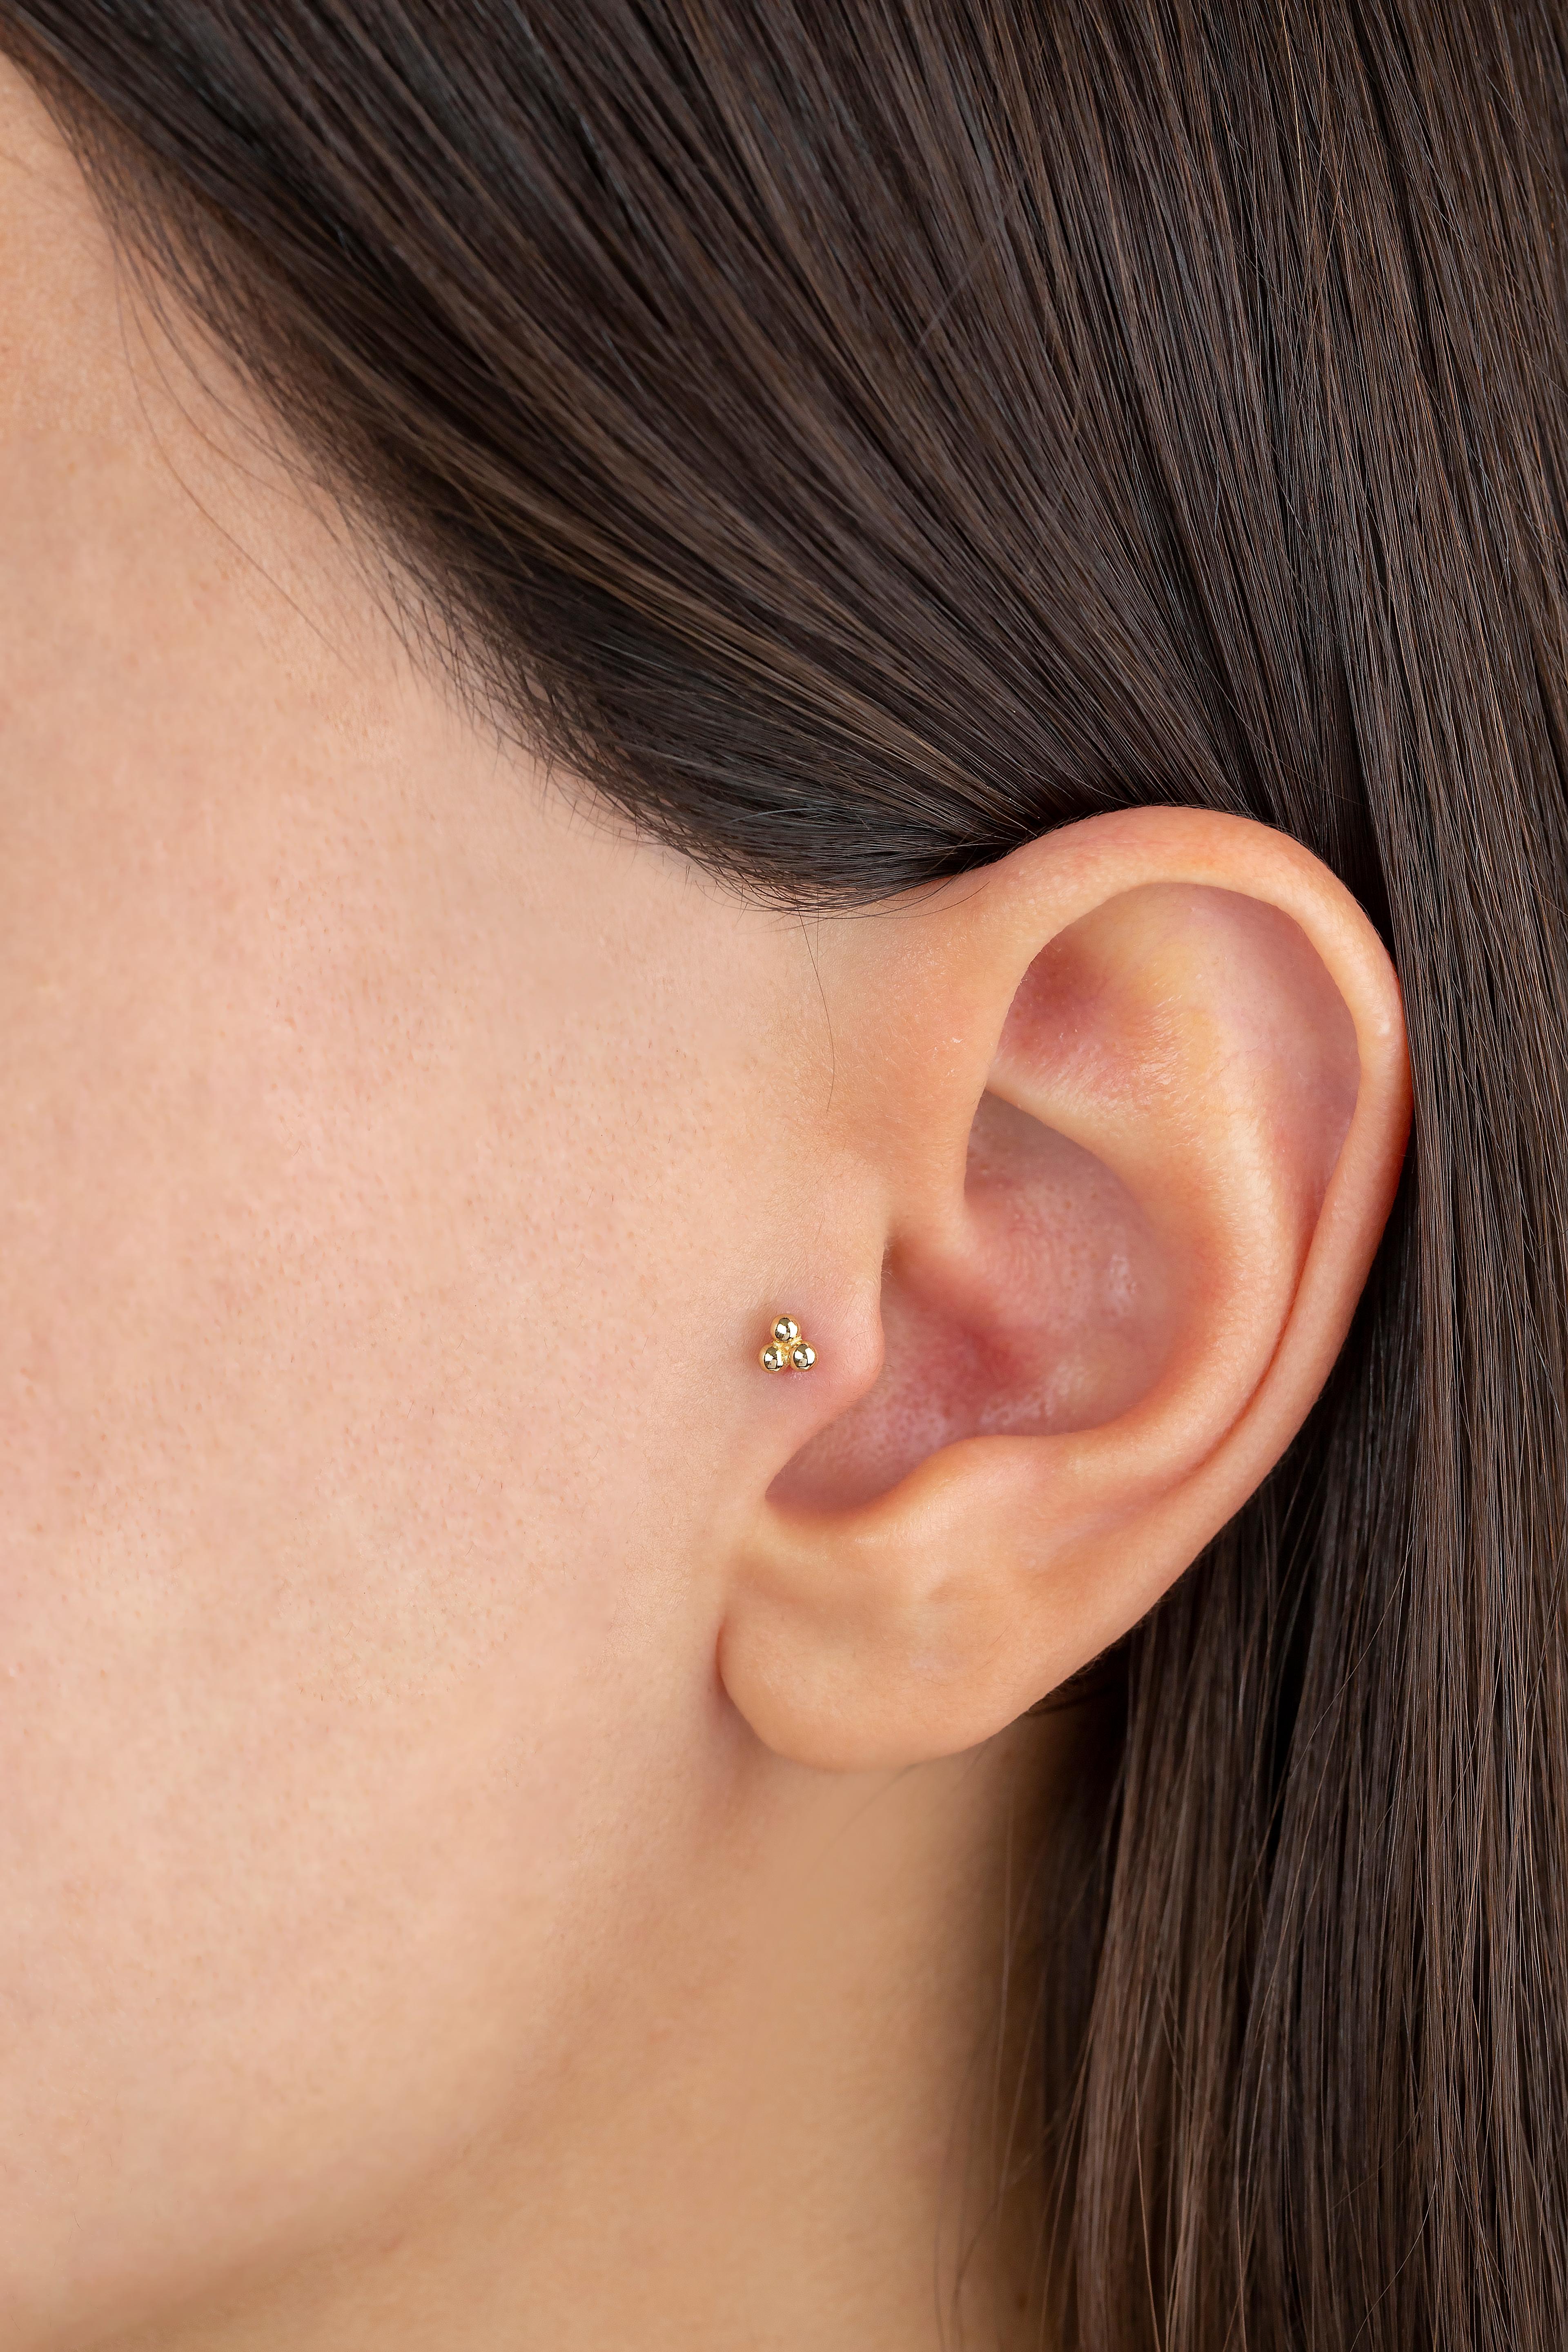 14K Gold Tria Dot Piercing, Three Balls Gold Stud Earring

You can use the piercing as an earring too! Also this piercing is suitable for tragus, nose, helix, lobe, flat, medusa, monreo, labret and stud.

This piercing was made with quality